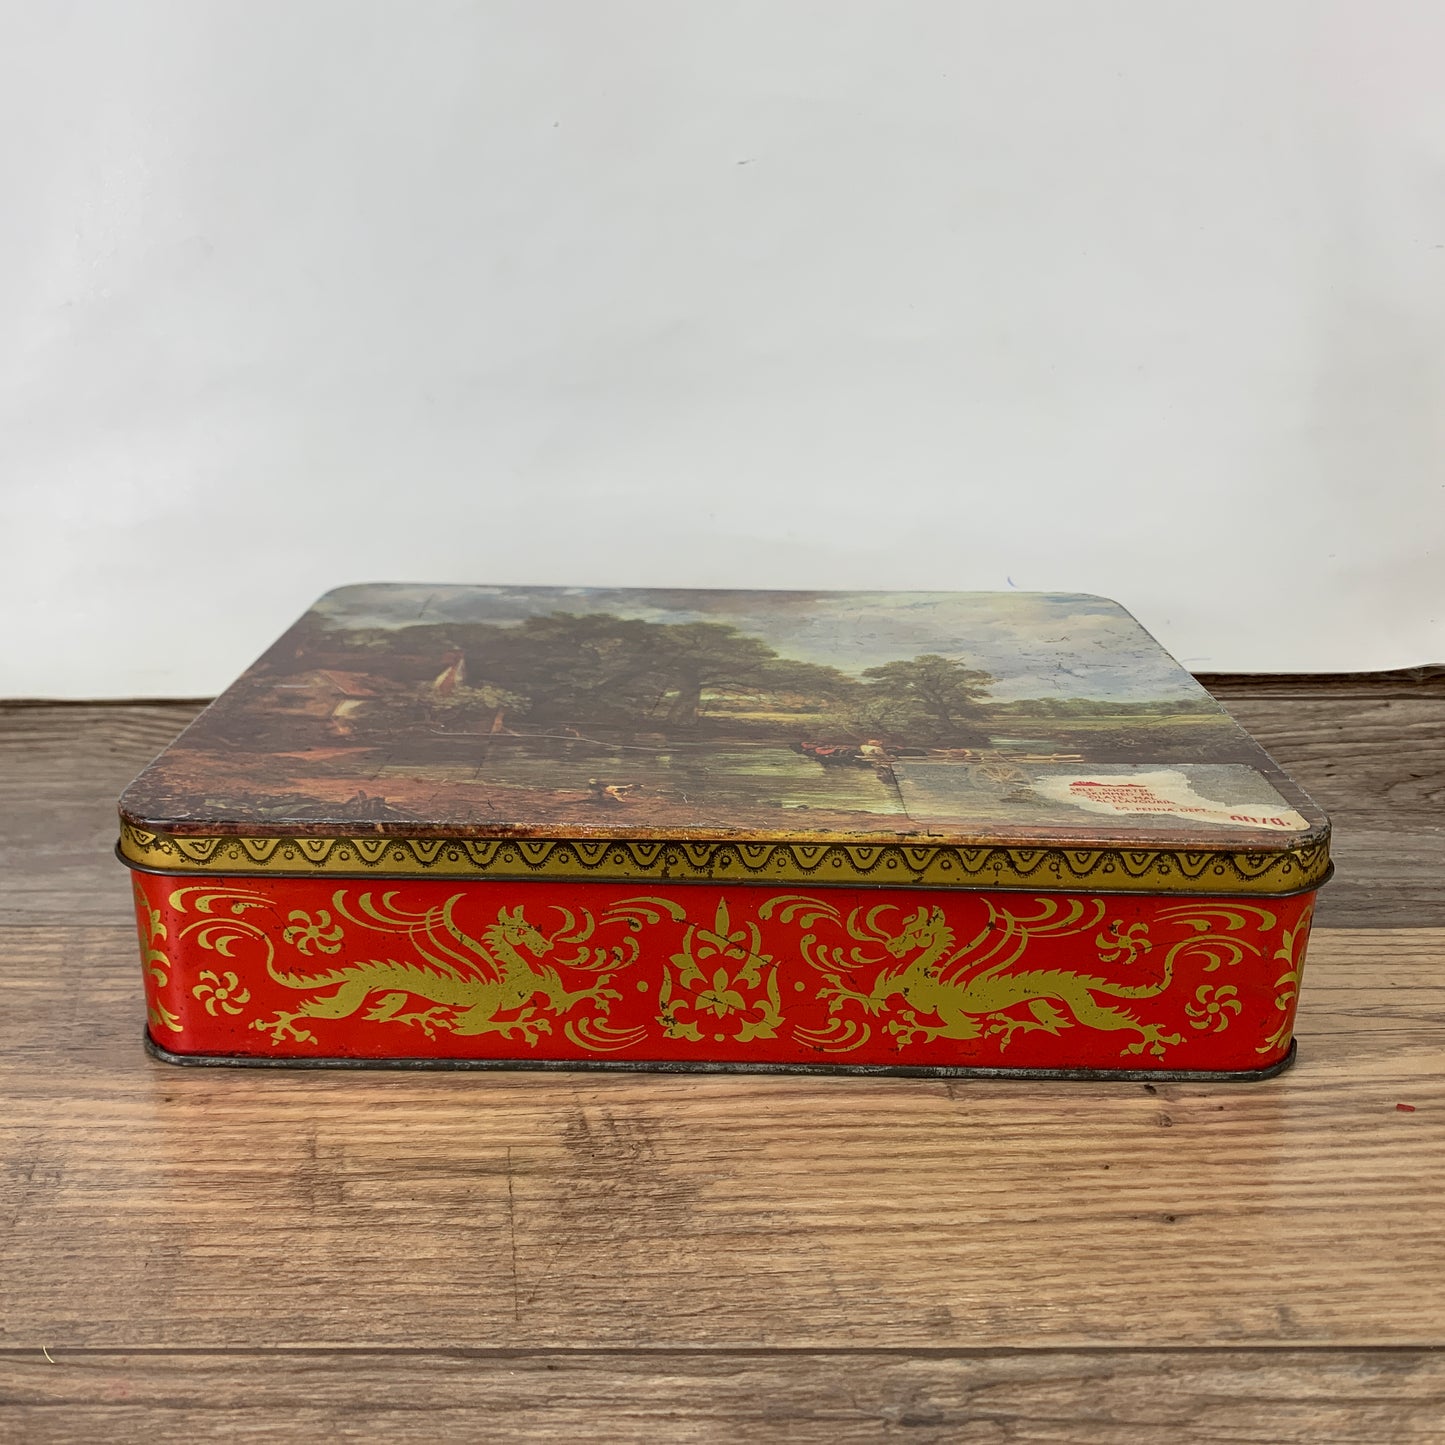 The Hay Wain English Countryside Landscape Painting on a Cookie Tin by Elkes Cookies